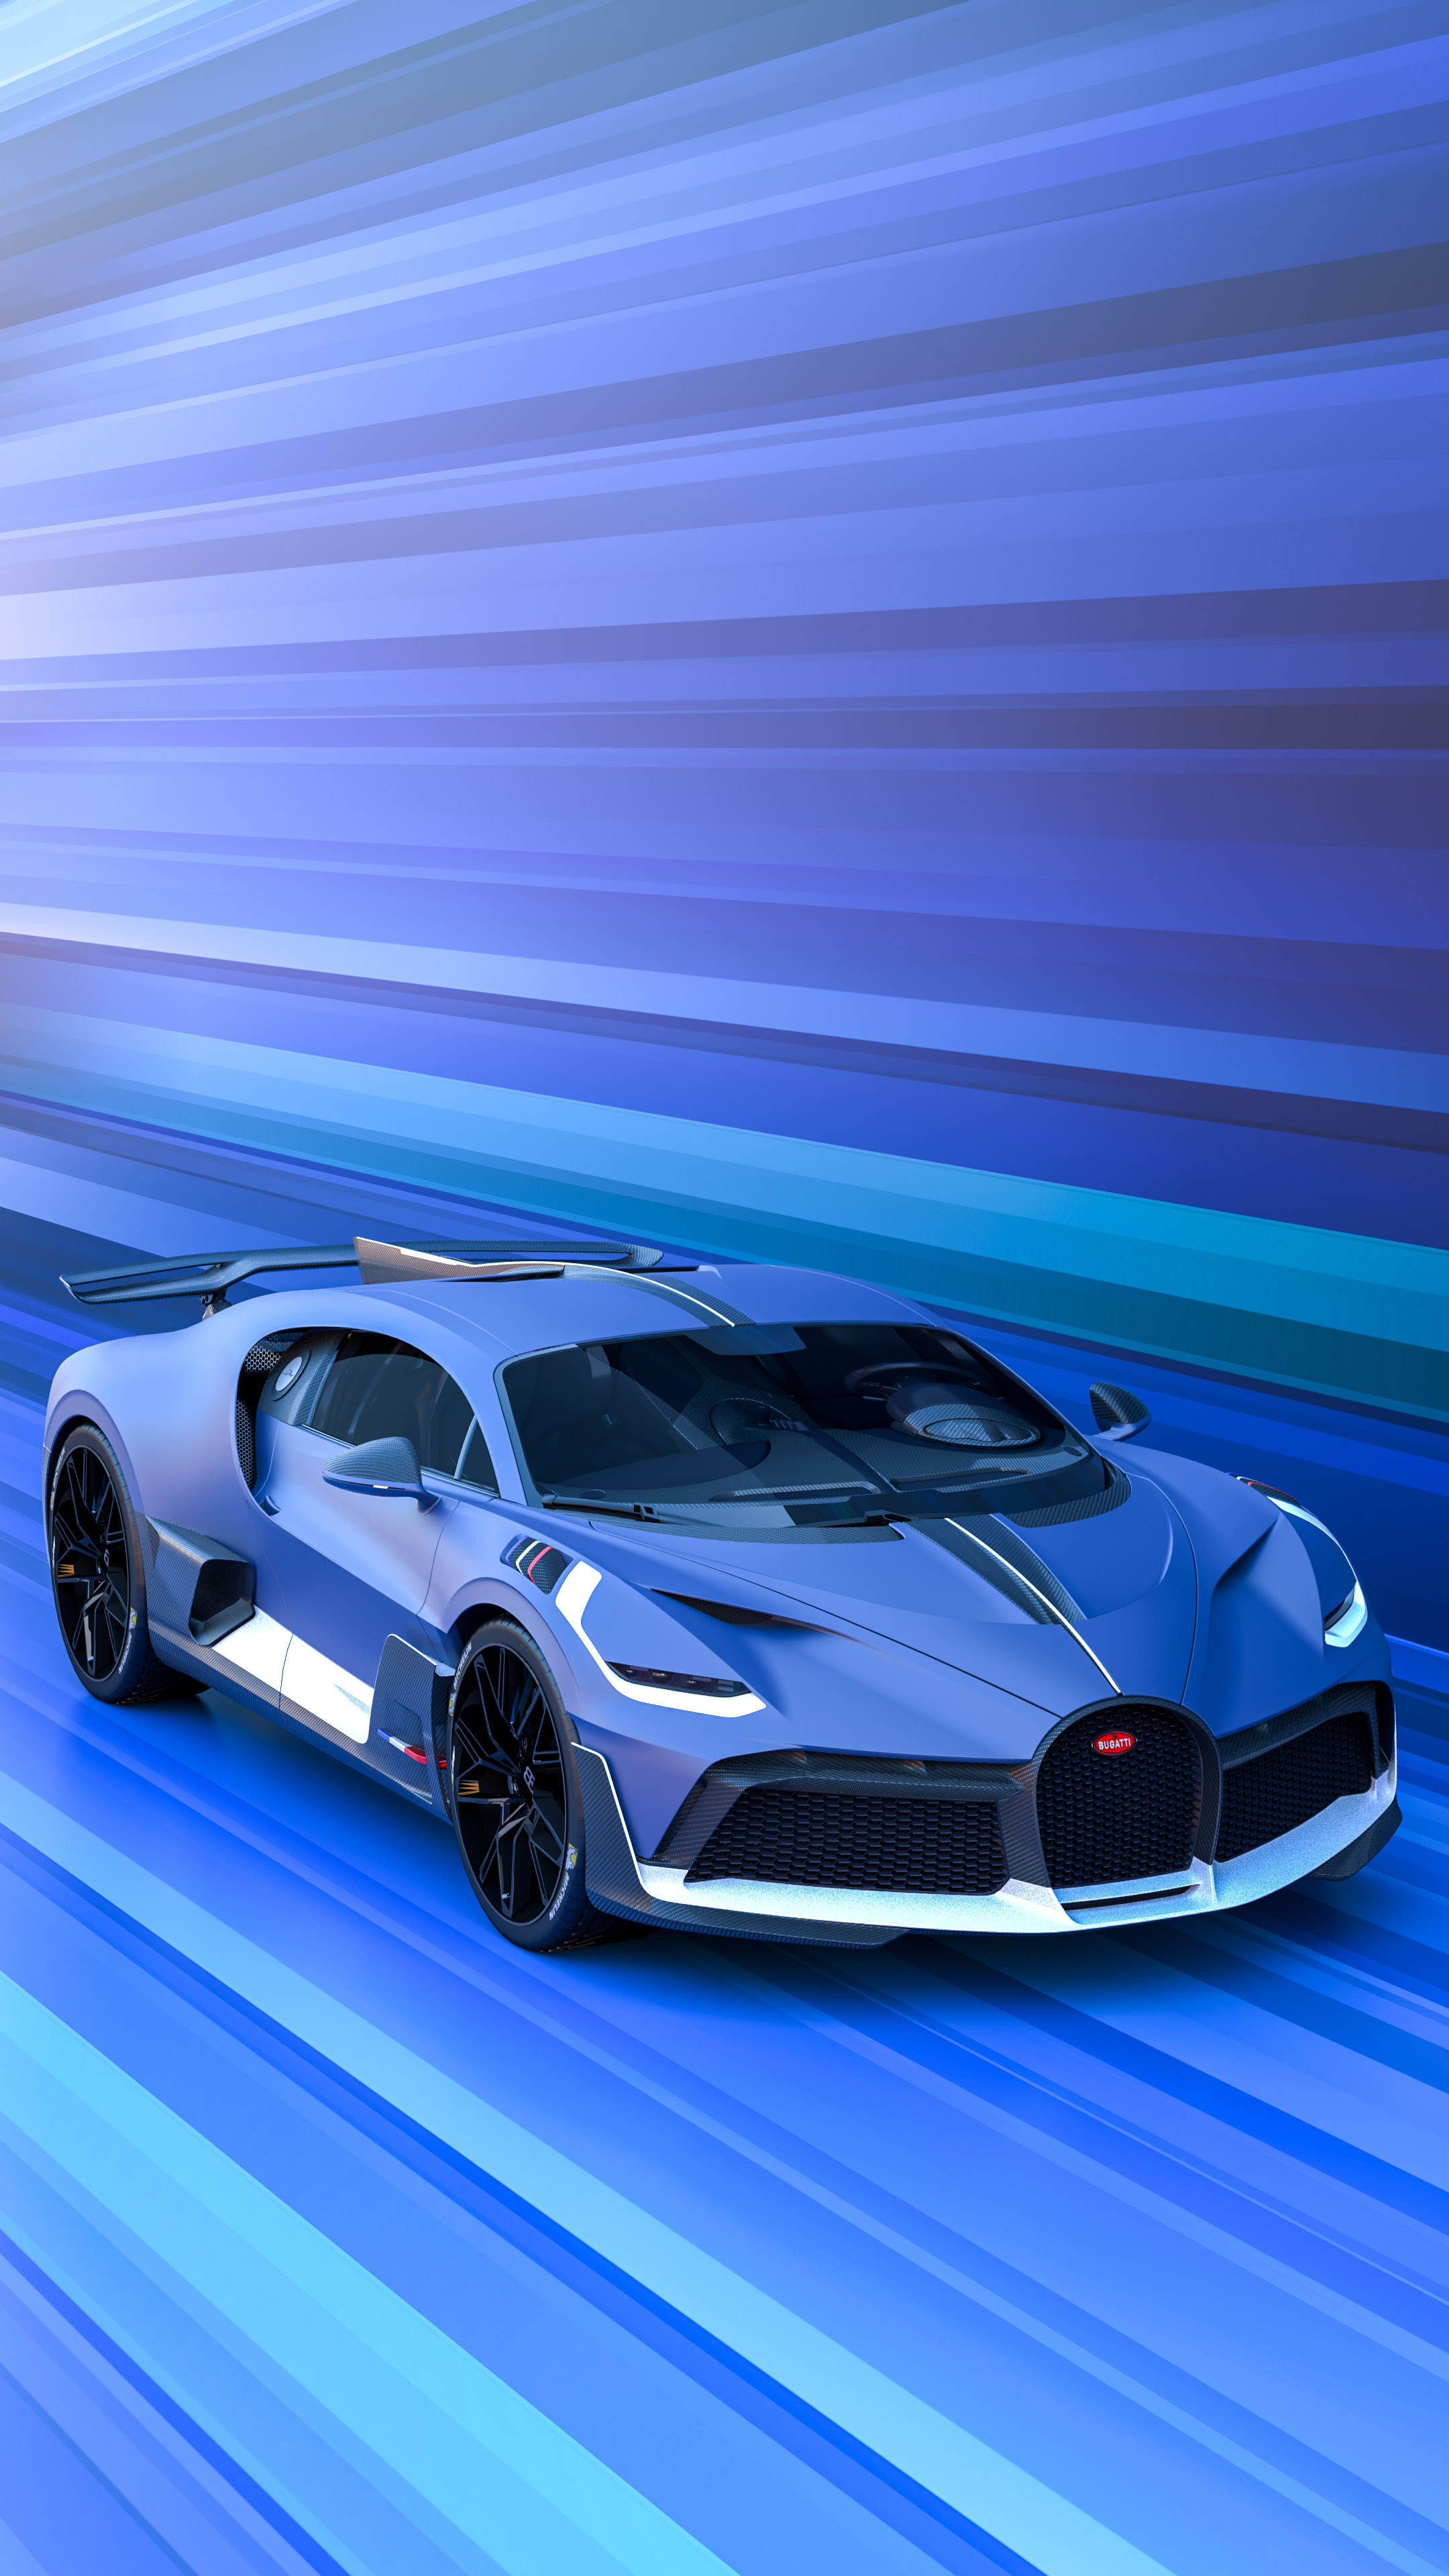 Our car wallpaper for phone includes the Bugatti DIVO, a symbol of speed and luxury, ready to bring a touch of elegance to your device.